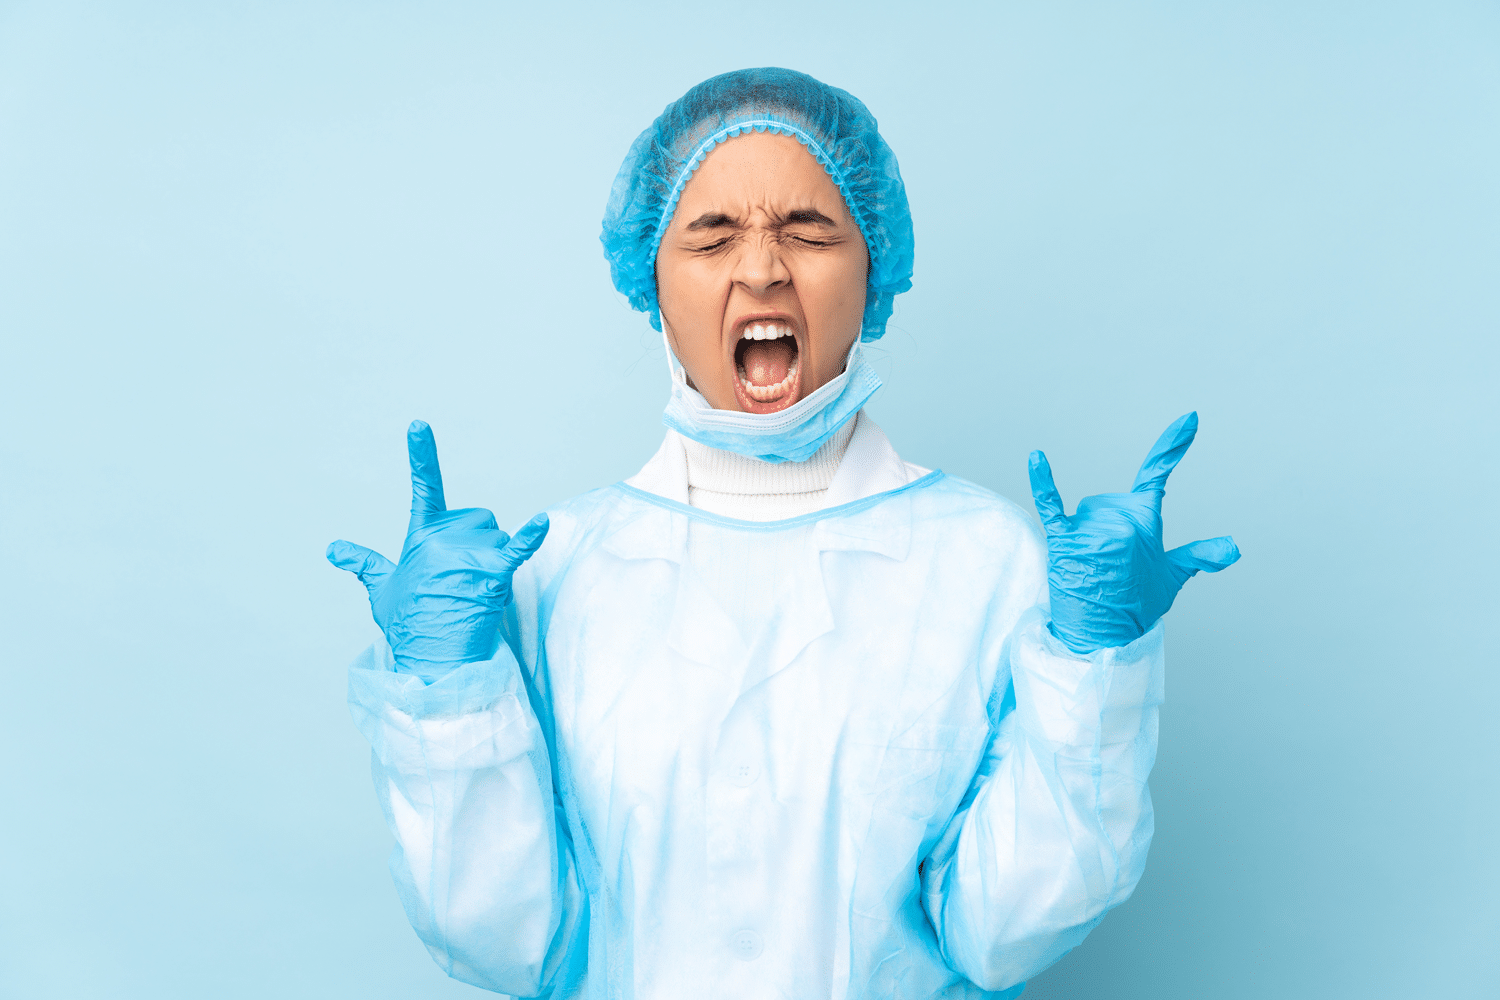 Female surgeon in scrubs making a rock and roll hand gesture